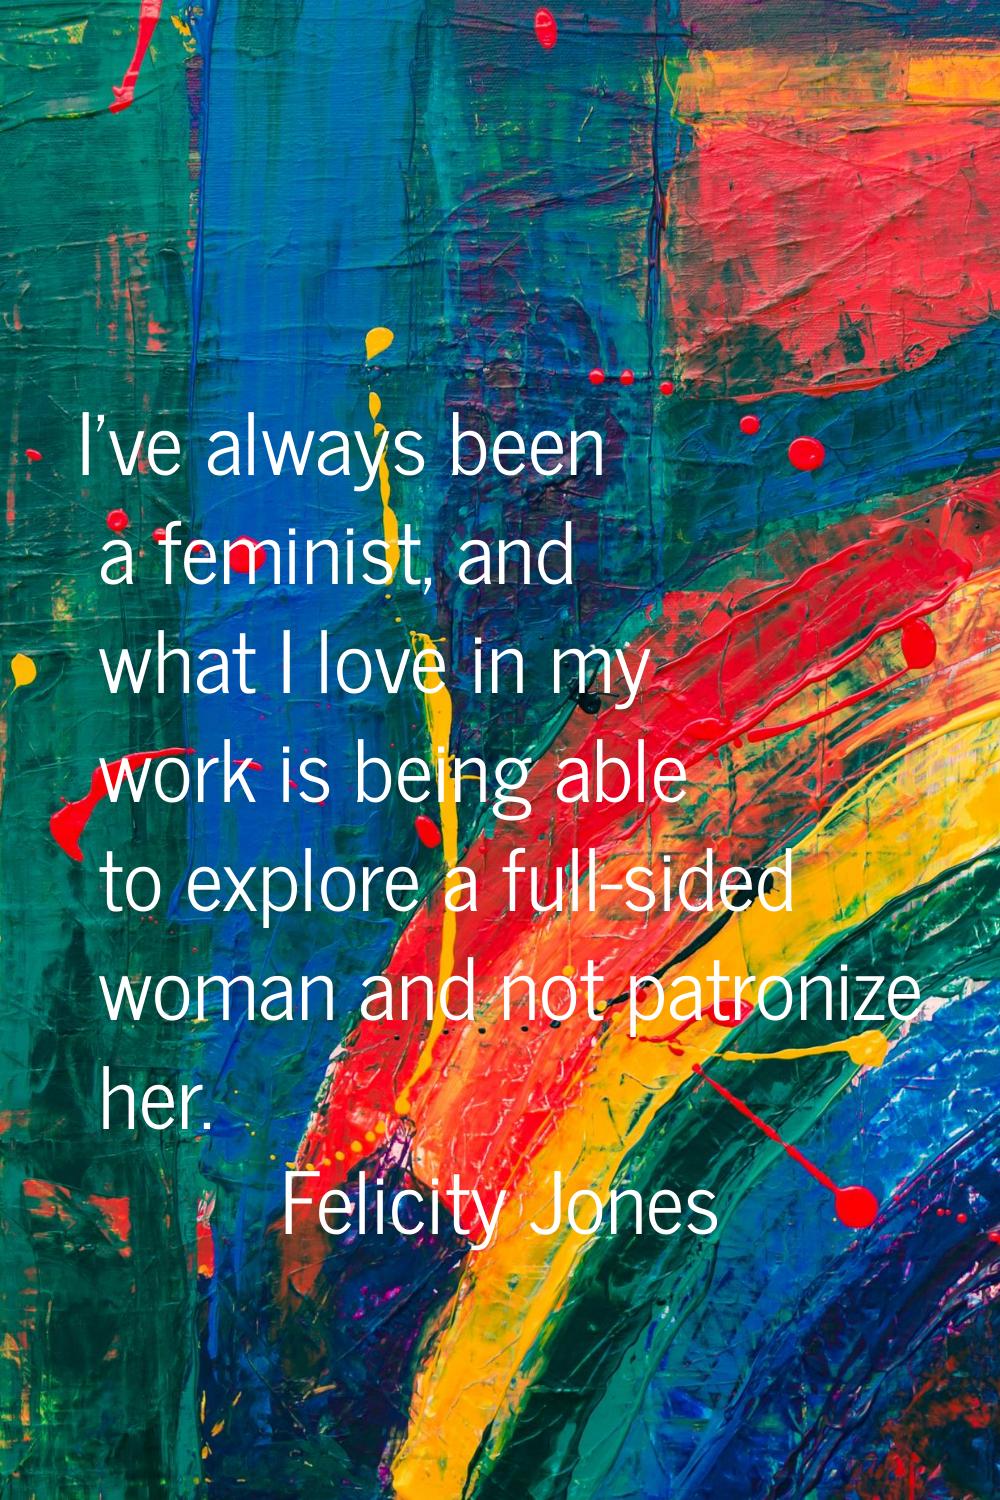 I've always been a feminist, and what I love in my work is being able to explore a full-sided woman